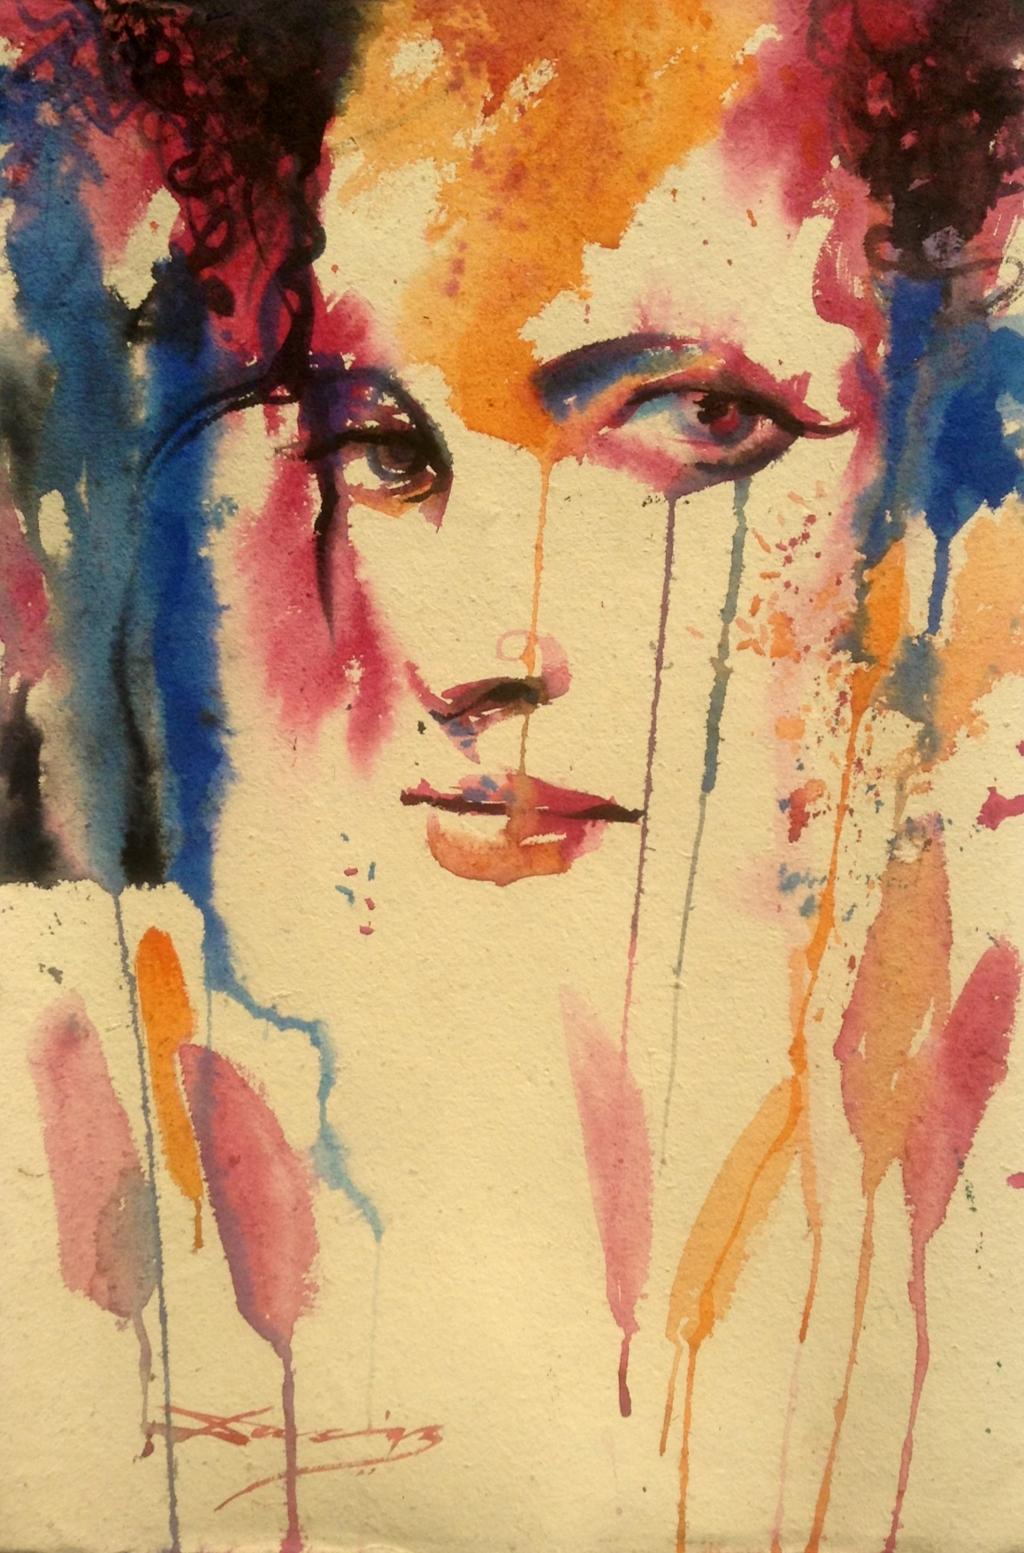 Painting: Warercolour portrait. We see feminine features. There are dashes of colour.  